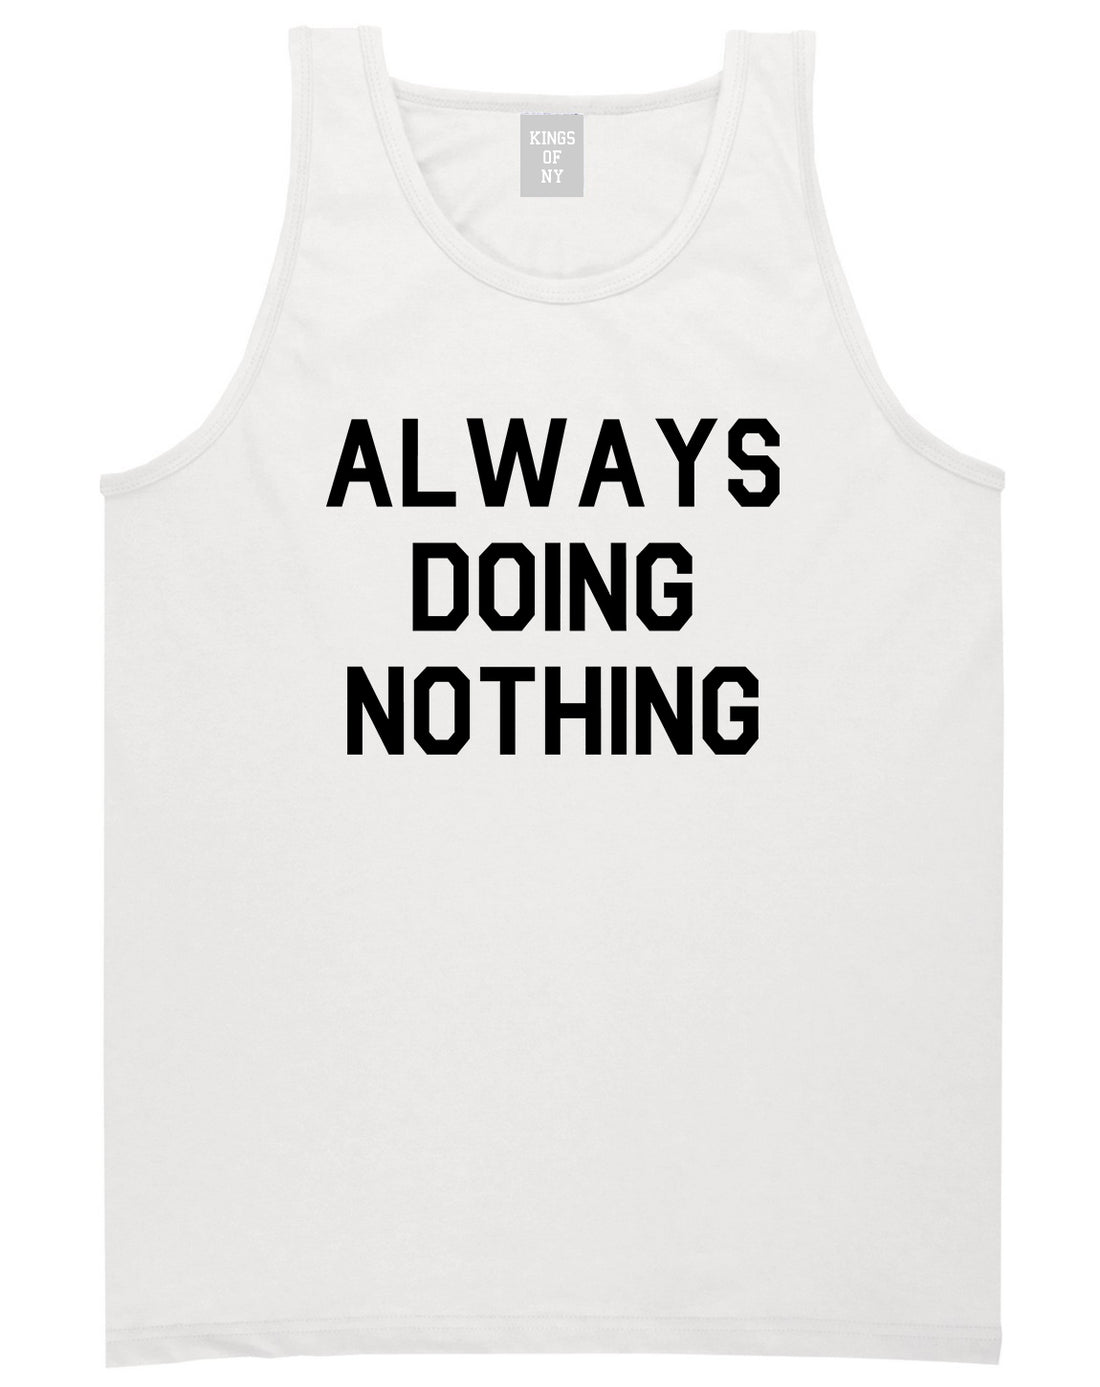 Always_Doing_Nothing Mens White Tank Top Shirt by Kings Of NY